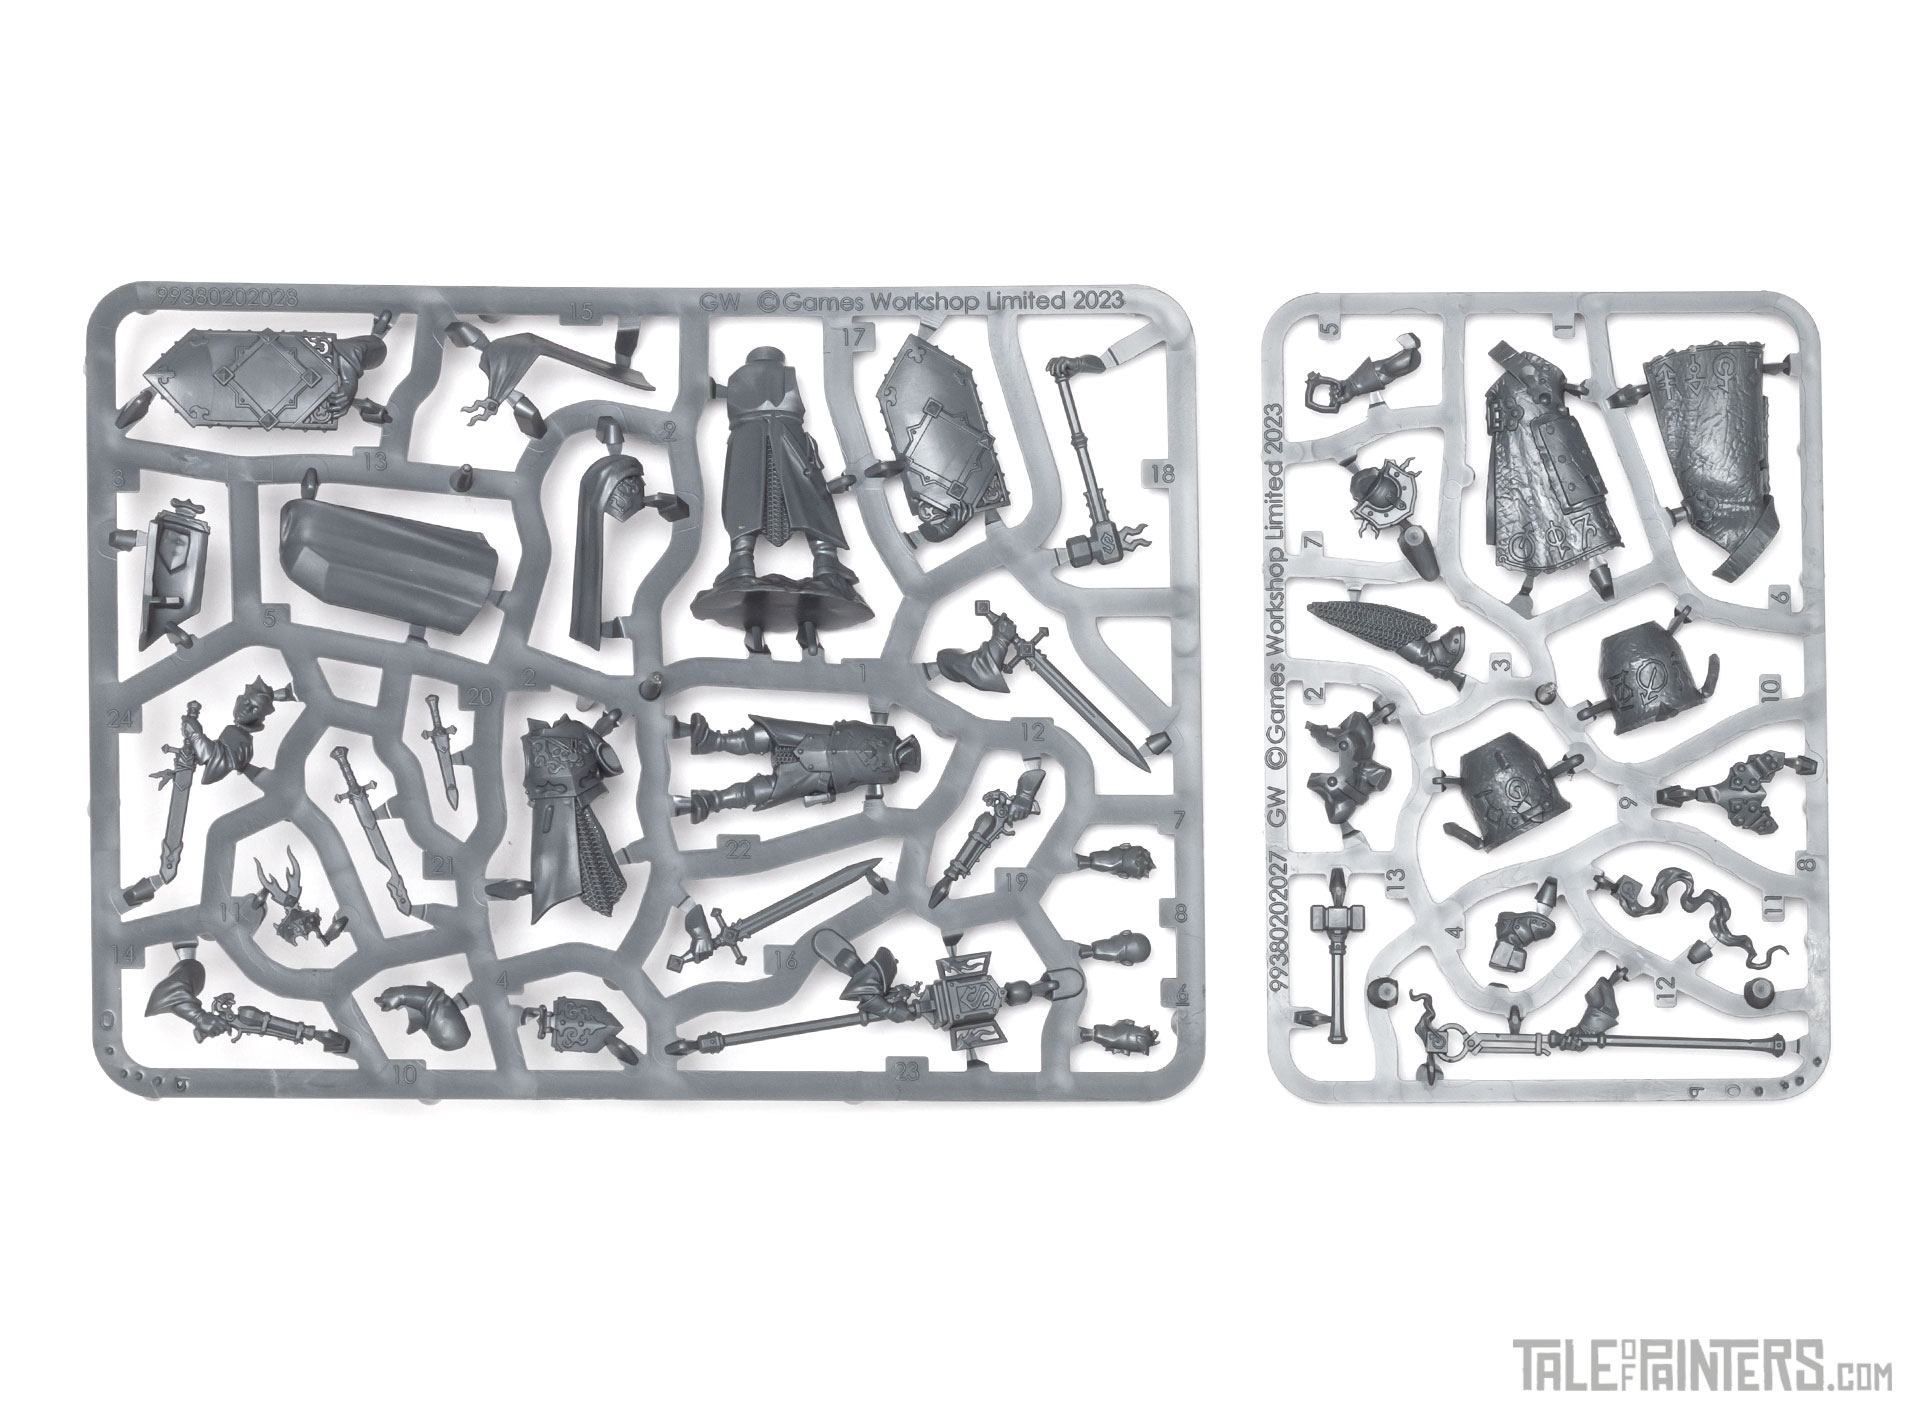 Freeguild Marshall and Alchemite Warforger sprues from Stahly's Cities of Sigmar army set review